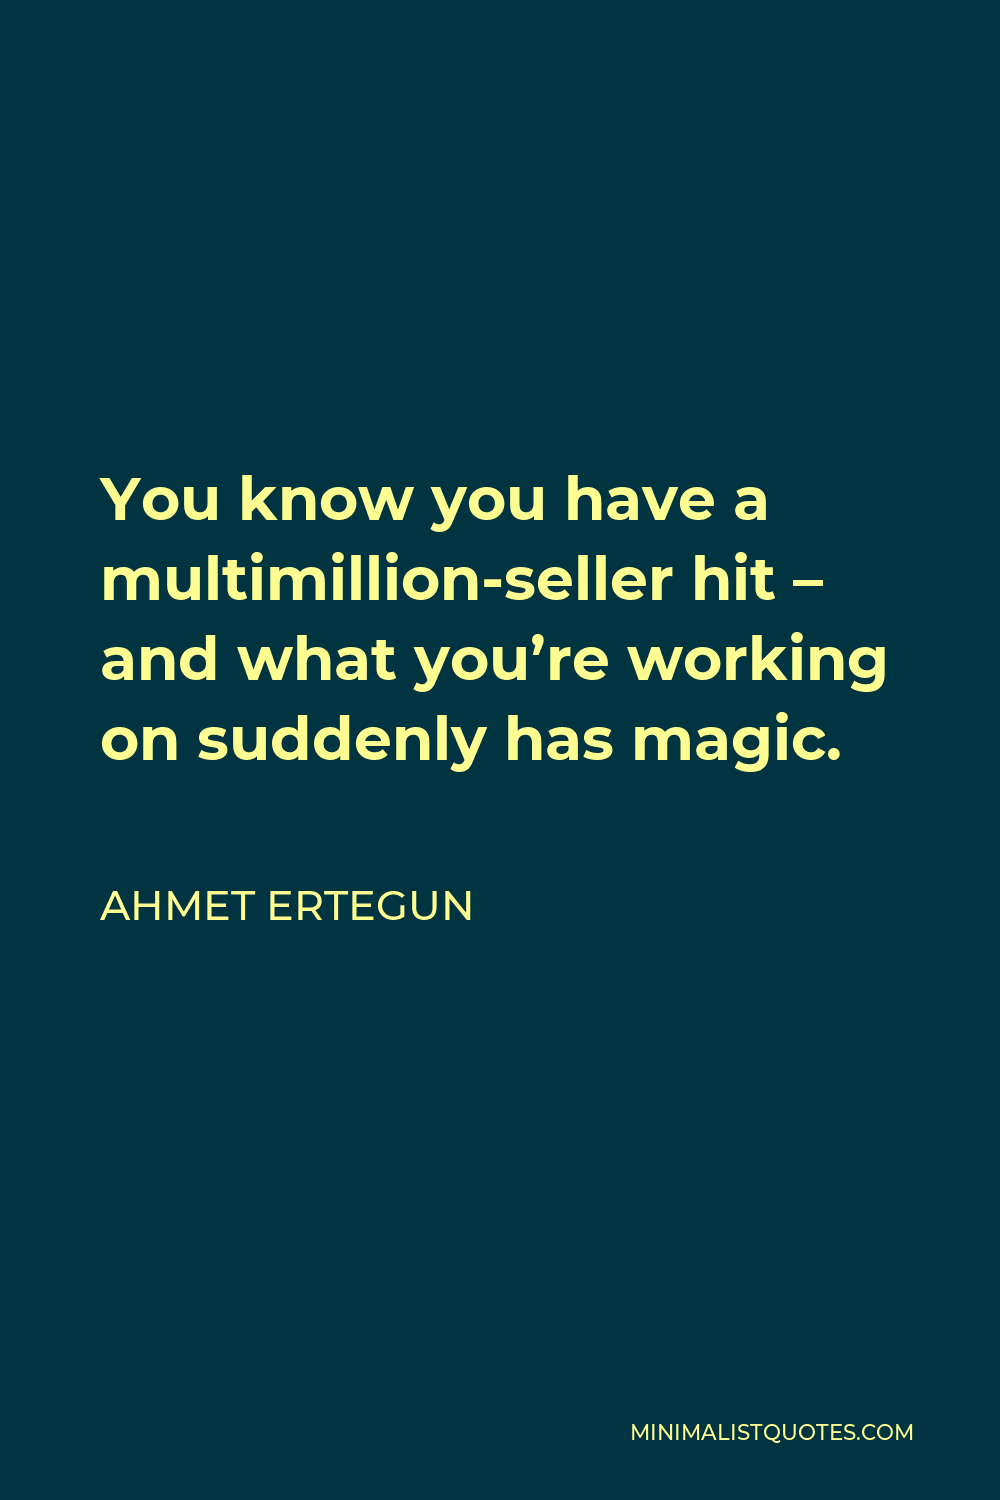 Ahmet Ertegun Quote - You know you have a multimillion-seller hit – and what you’re working on suddenly has magic.